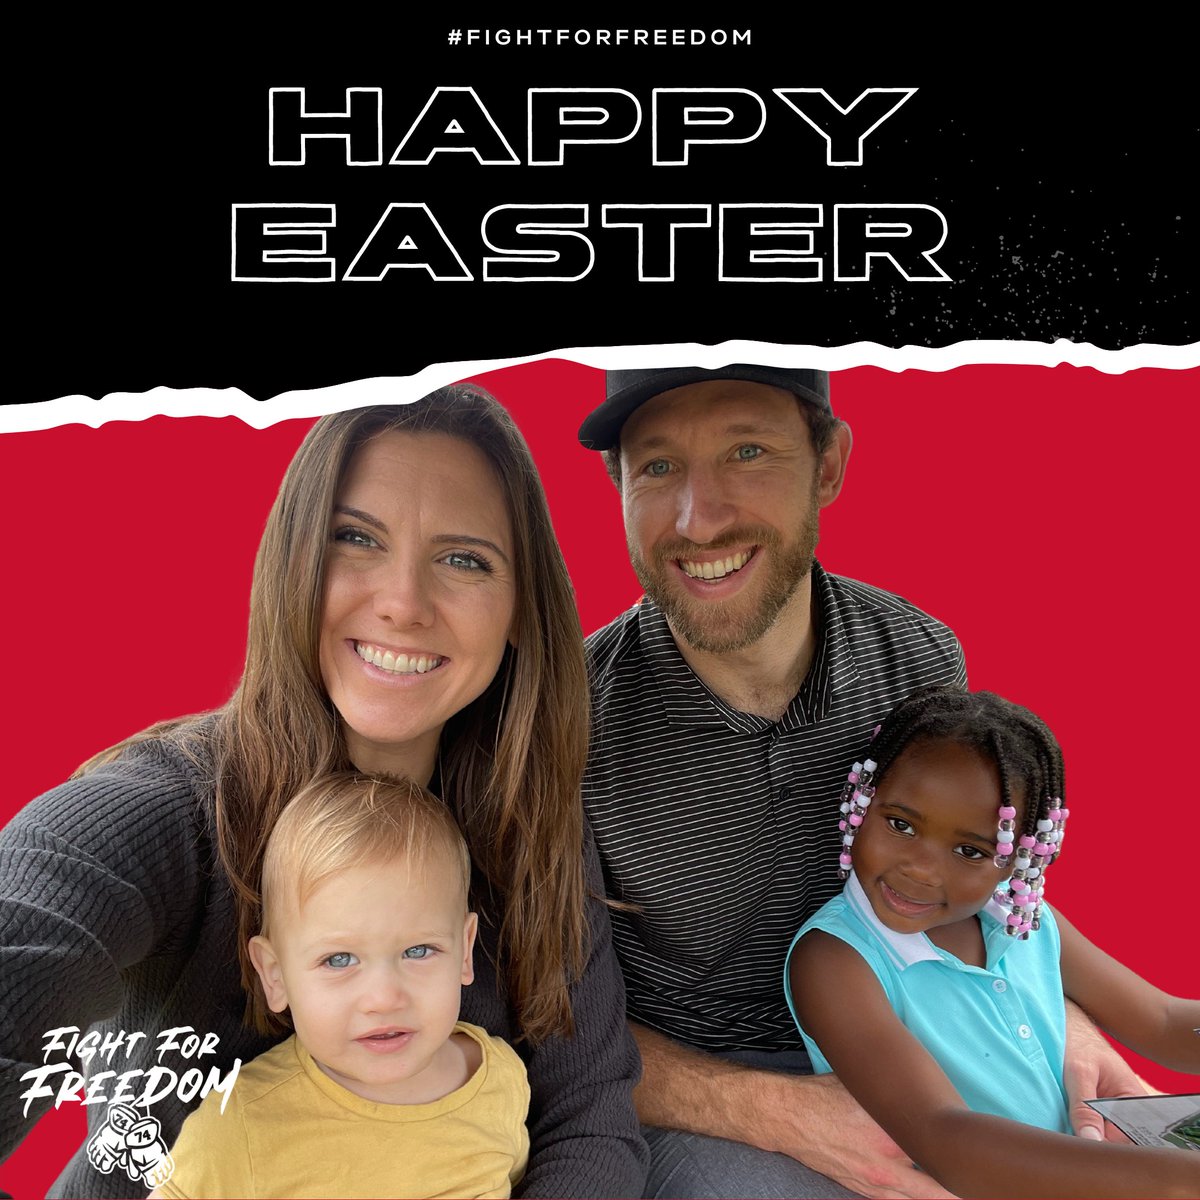 Happy Easter from our family to yours! Today we celebrate eternal hope and new life.

#FightForFreedom #PointsForFreedom #FightForFreedom74 #JaccobSlavin #IJM #EndHumanTrafficking #EndSlavery #Hockey #Justice #CarolinaHurricanes #Canes #NorthCarolina  #EasterSunday #HeIsRisen